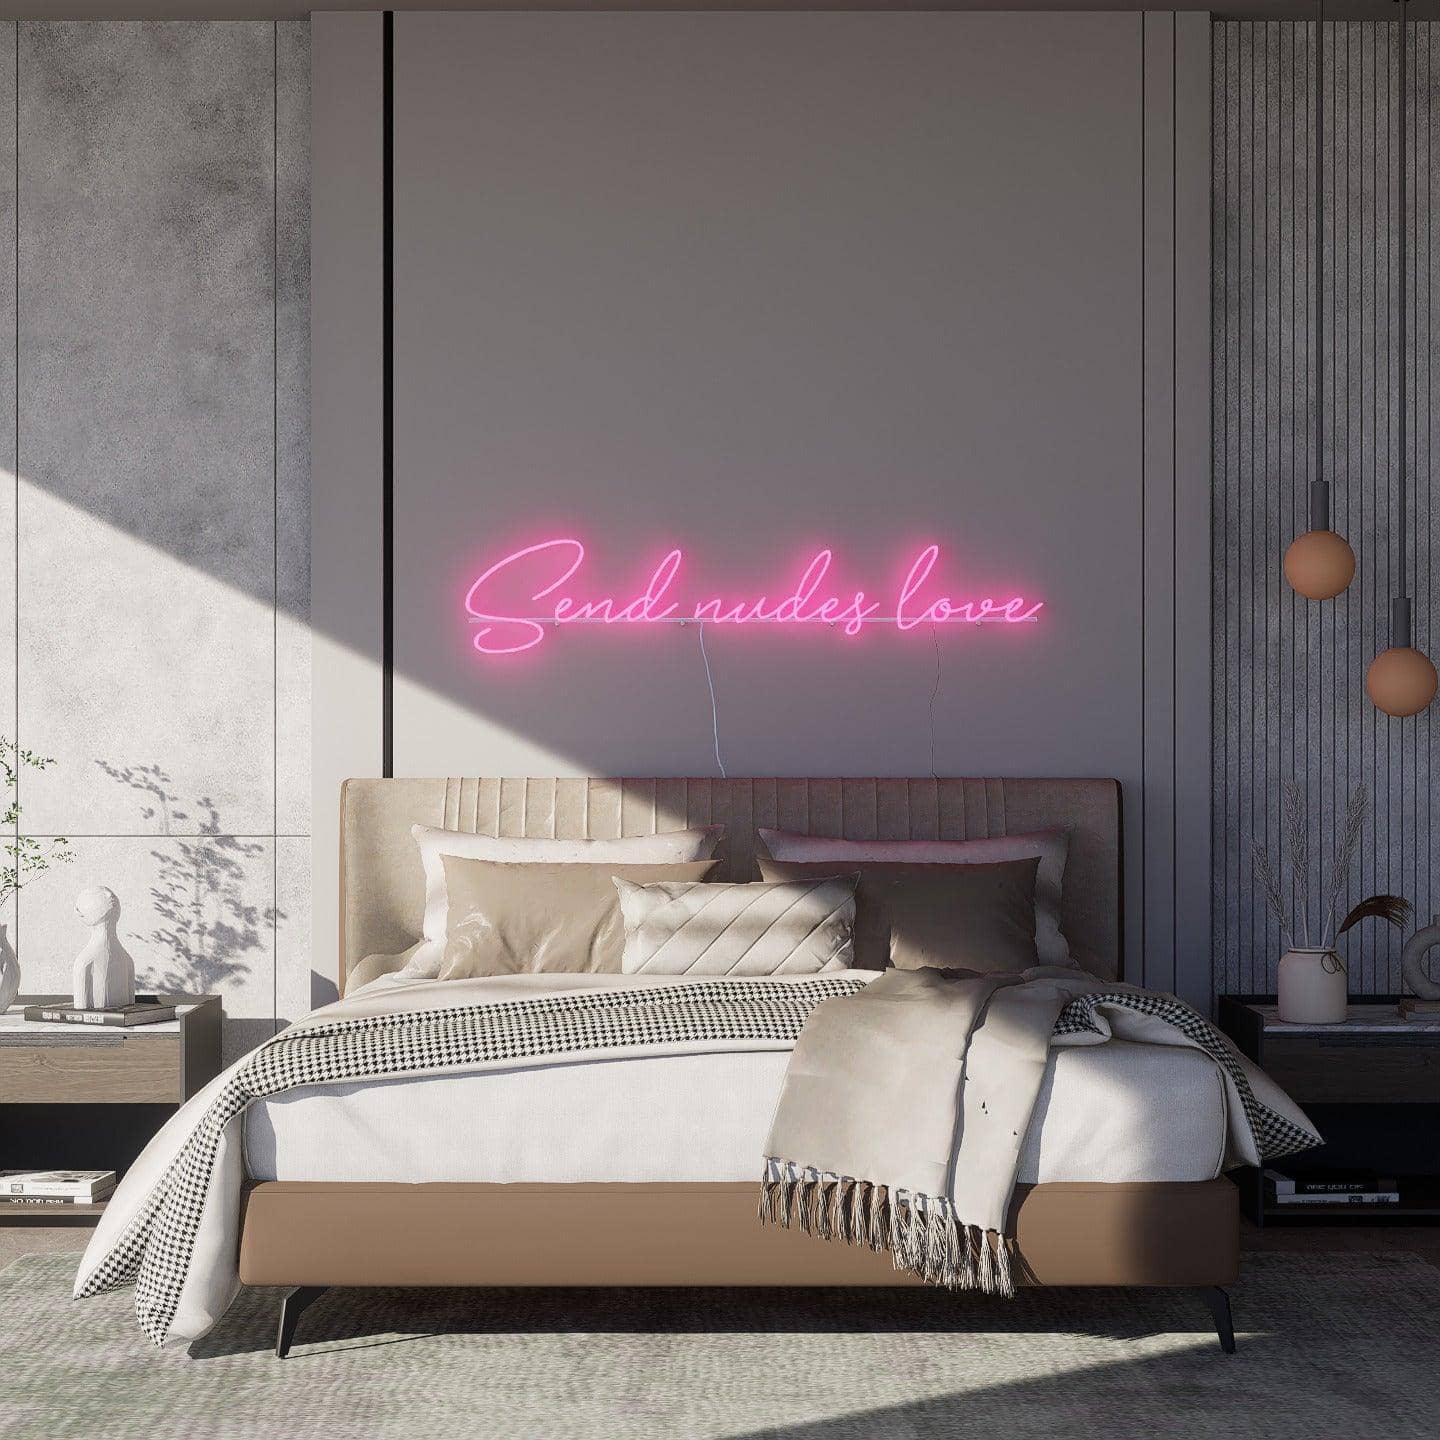 light-up-pink-neon-lights-during-the-day-and-hang-on-the-wall-for-display-send-nudes-love